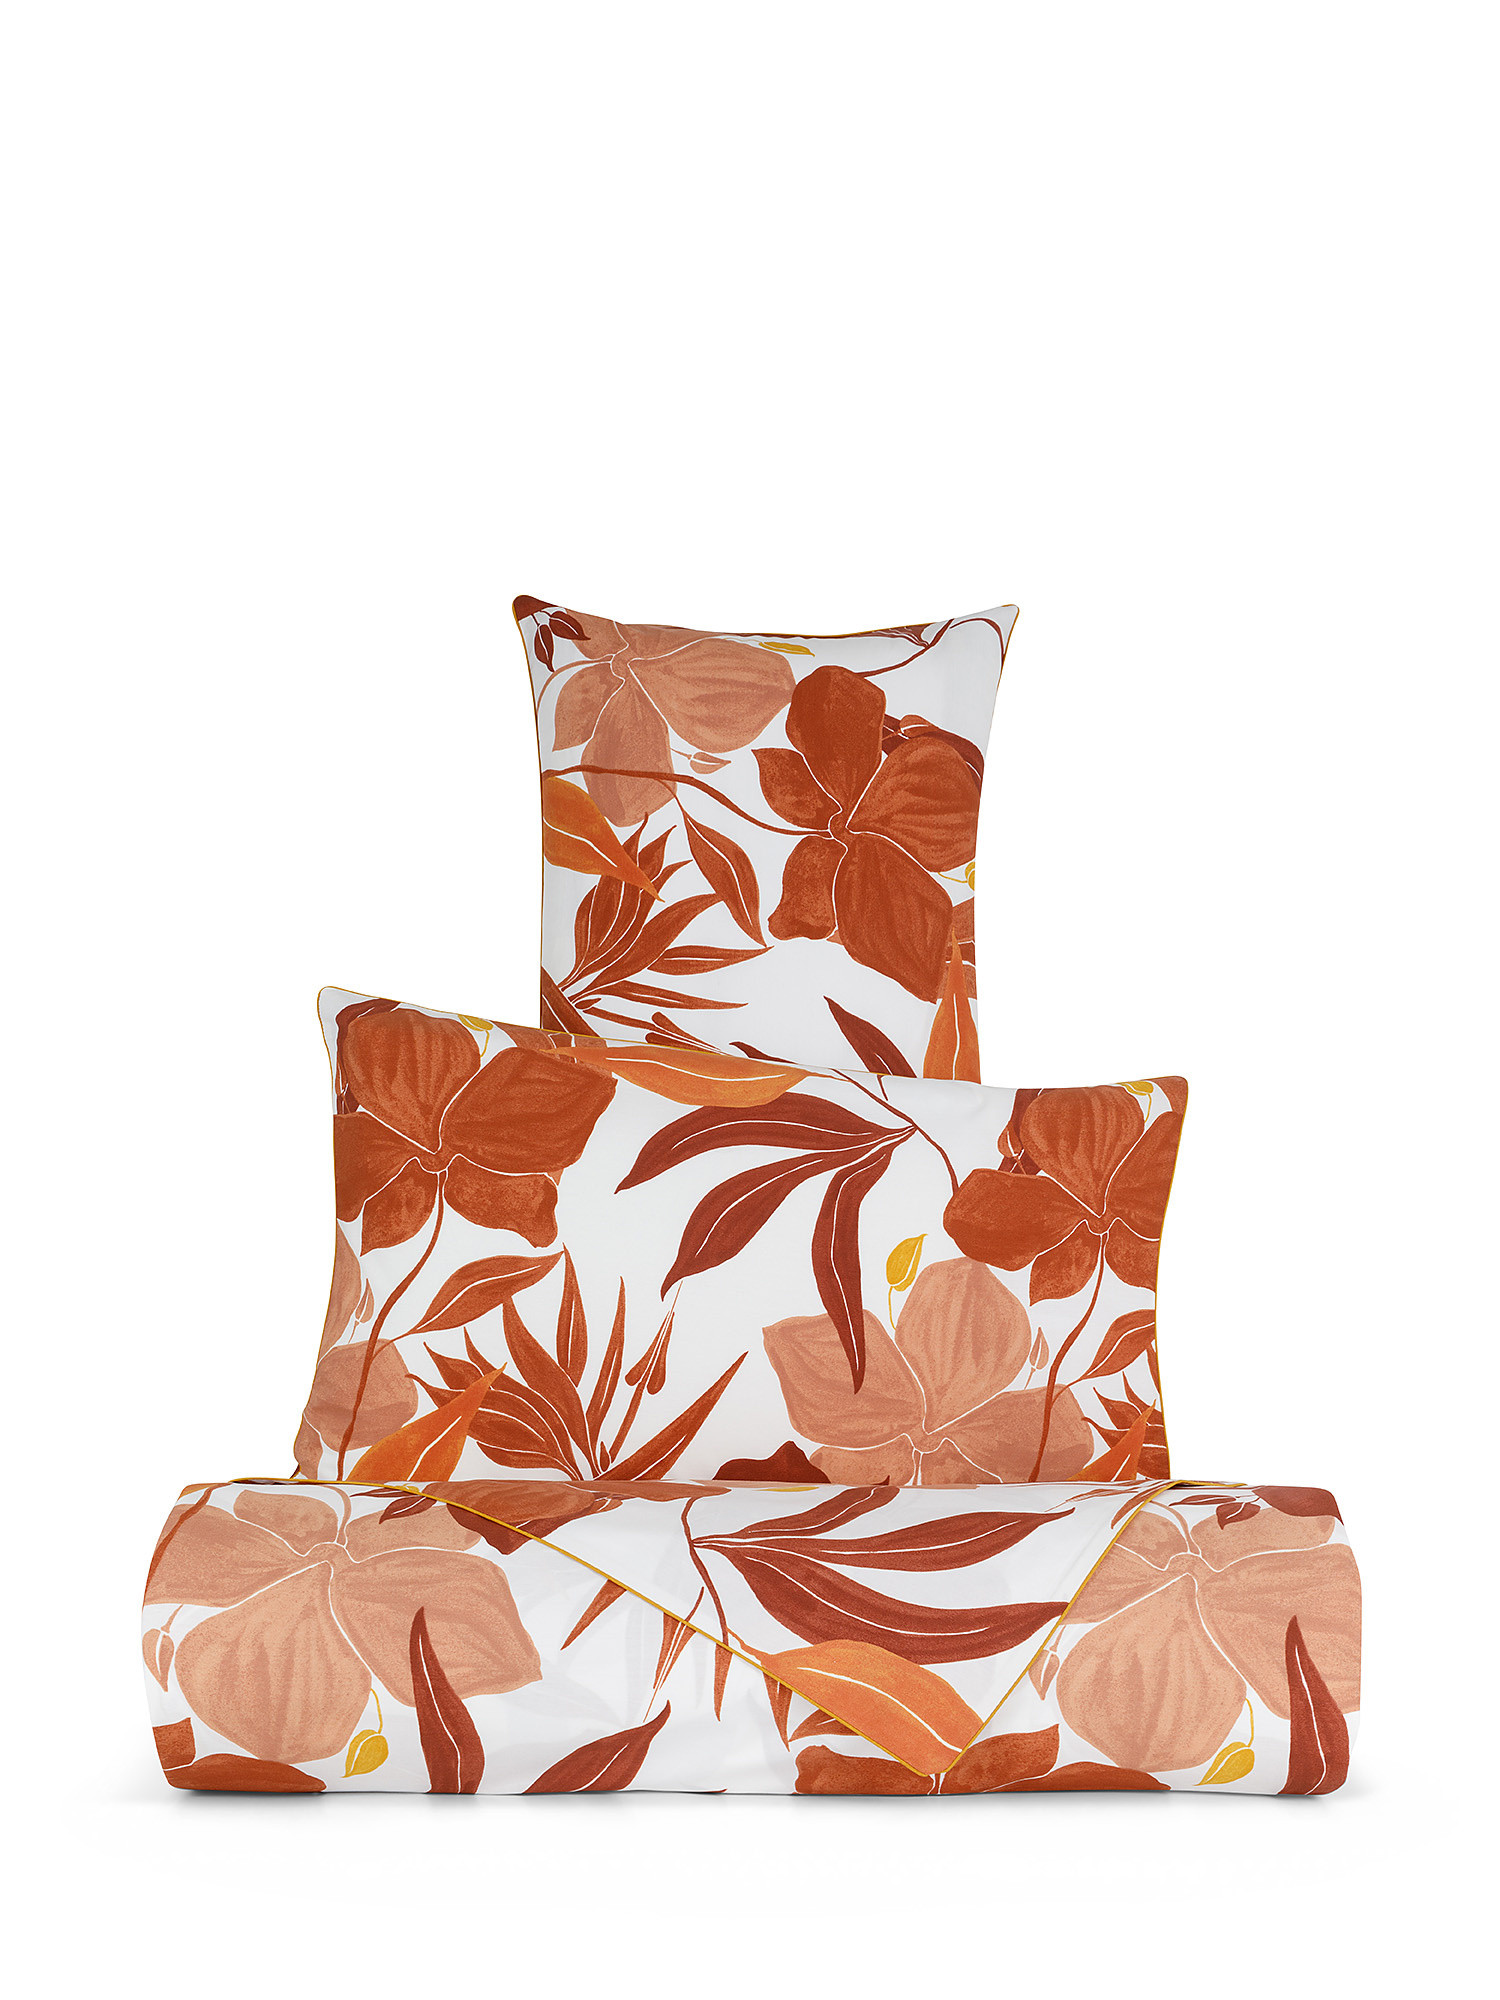 Floral patterned cotton percale duvet cover, Brown, large image number 0